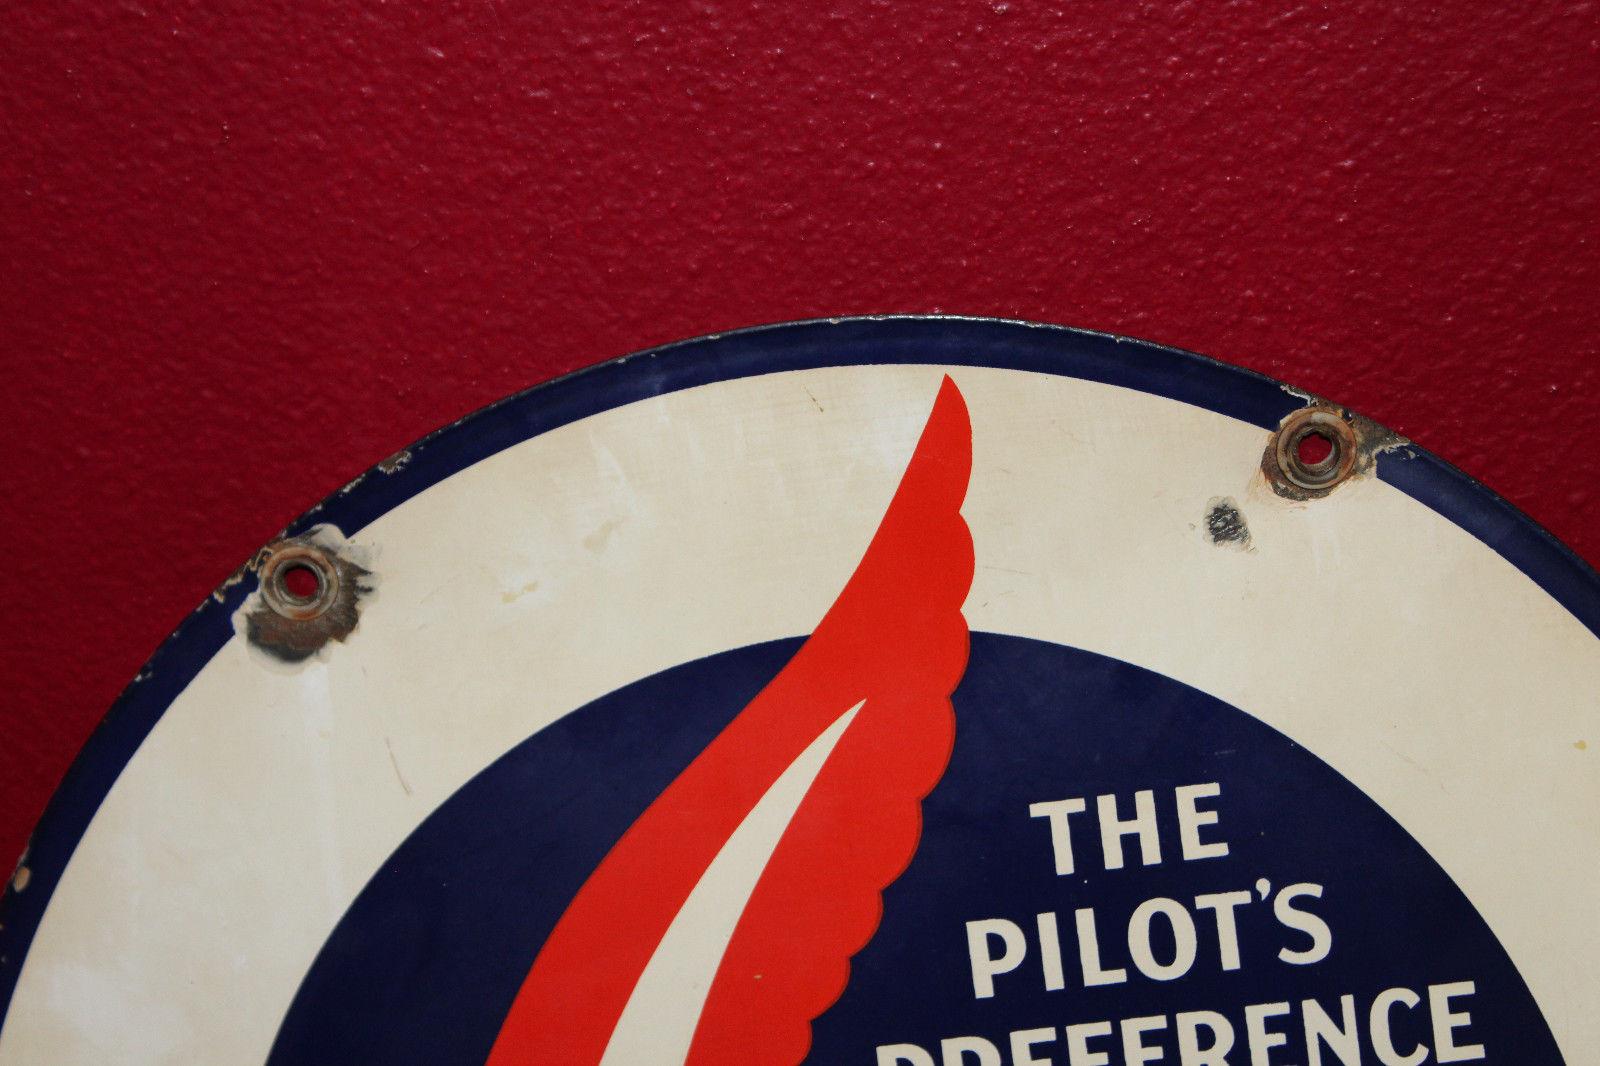 The sign has a large red feather type item in the centre. The text reads “The Pilot’s Preference Learadio Sales and Service.”.